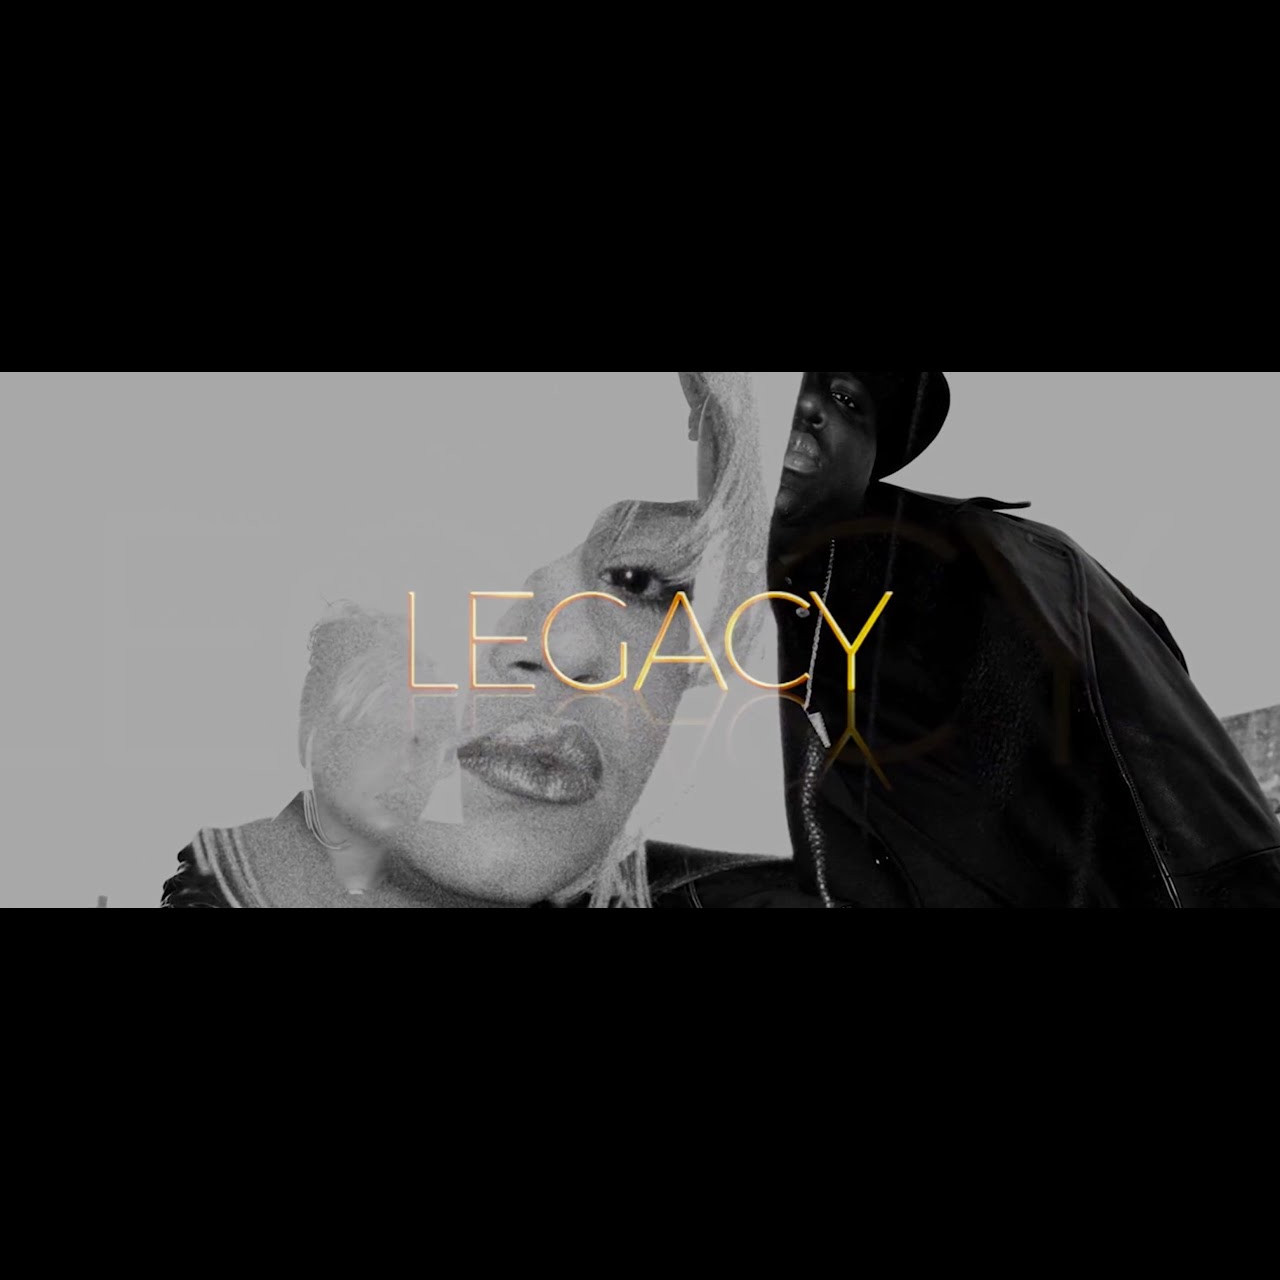 Faith Evans and The Notorious B.I.G. - Legacy (Thumbnail)